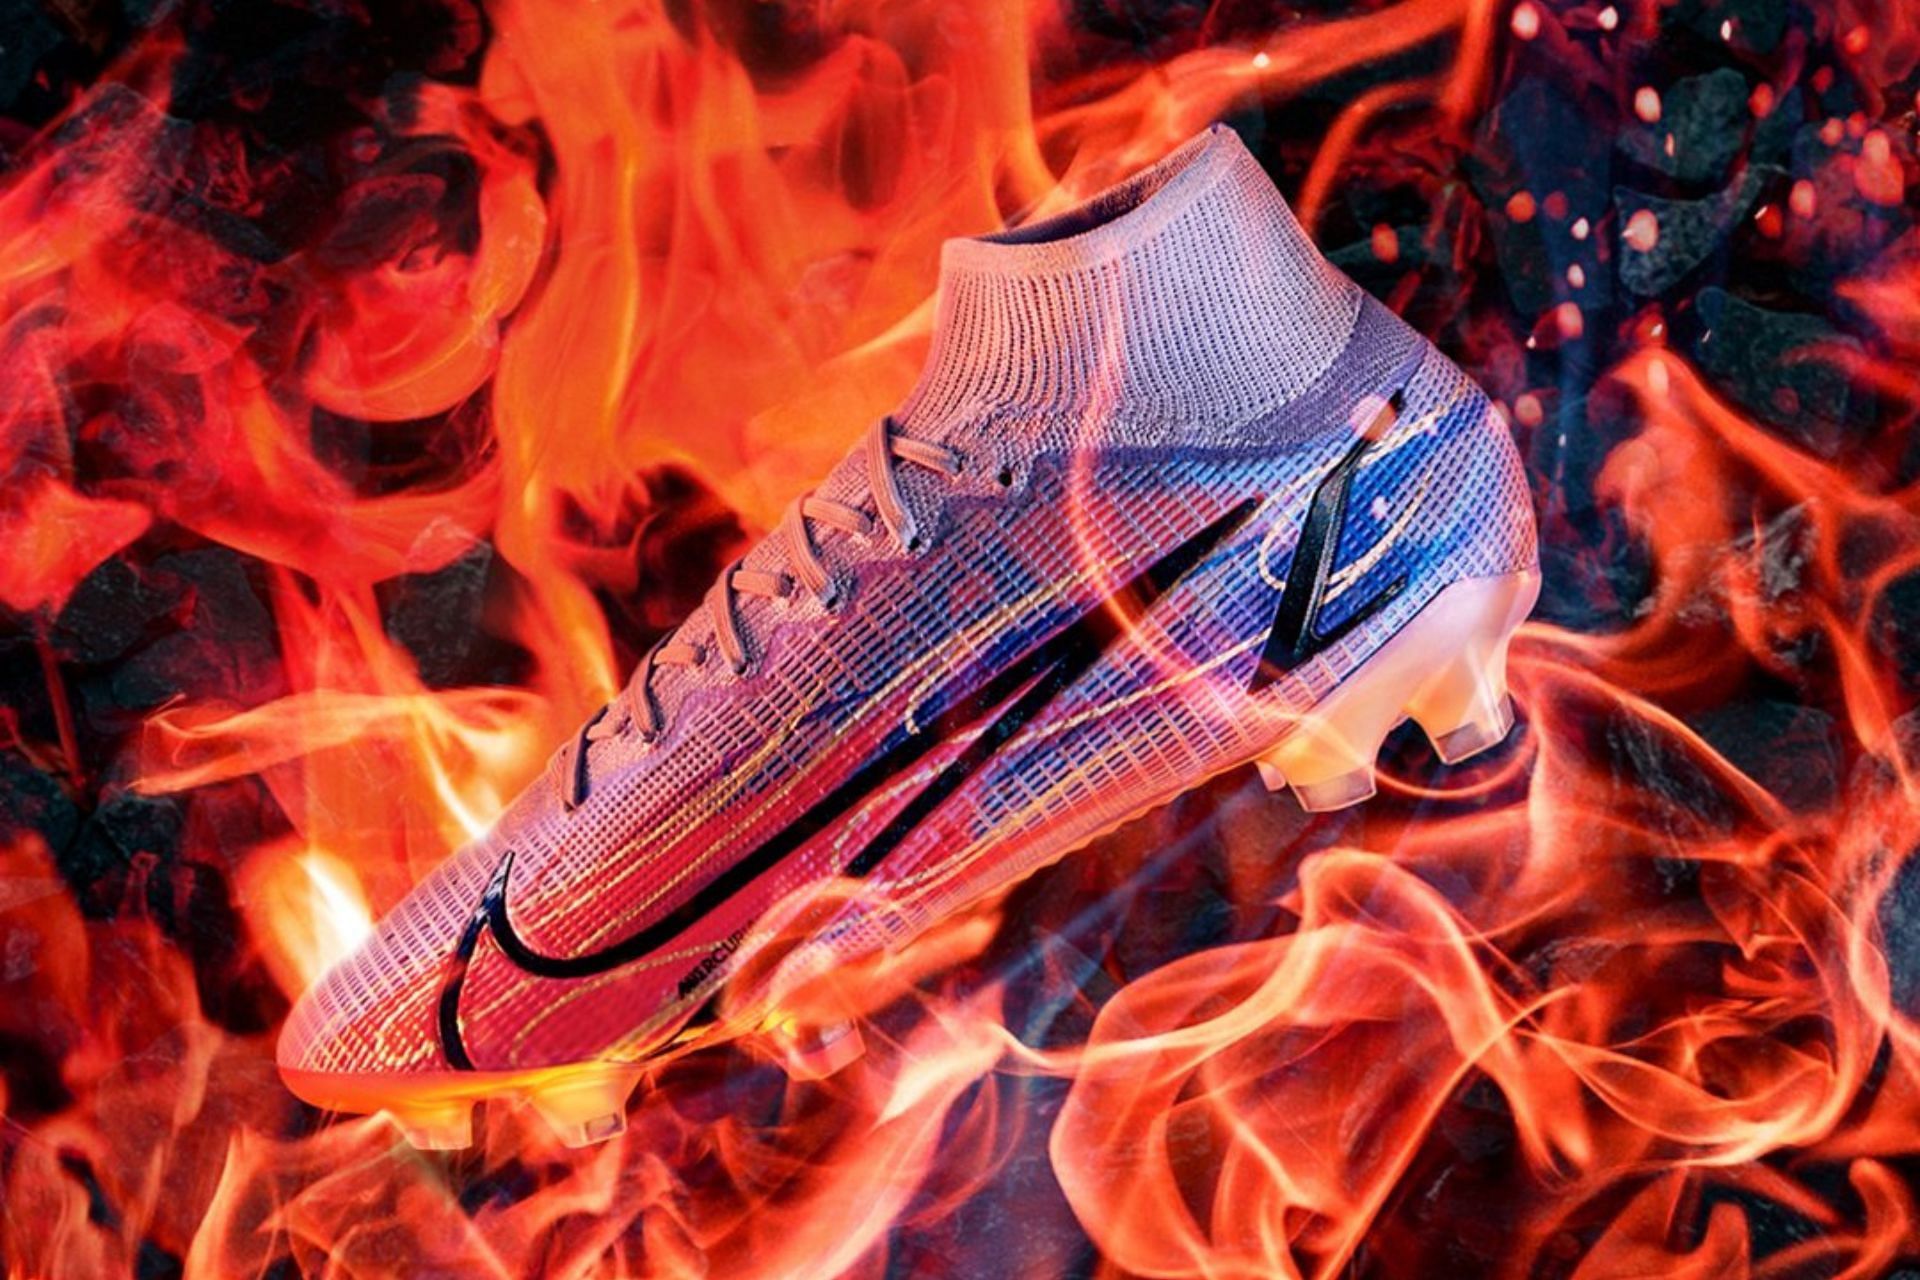 Take a closer look at the KM Flames football cleats (Image via Twitter/@ProD_Soccer)